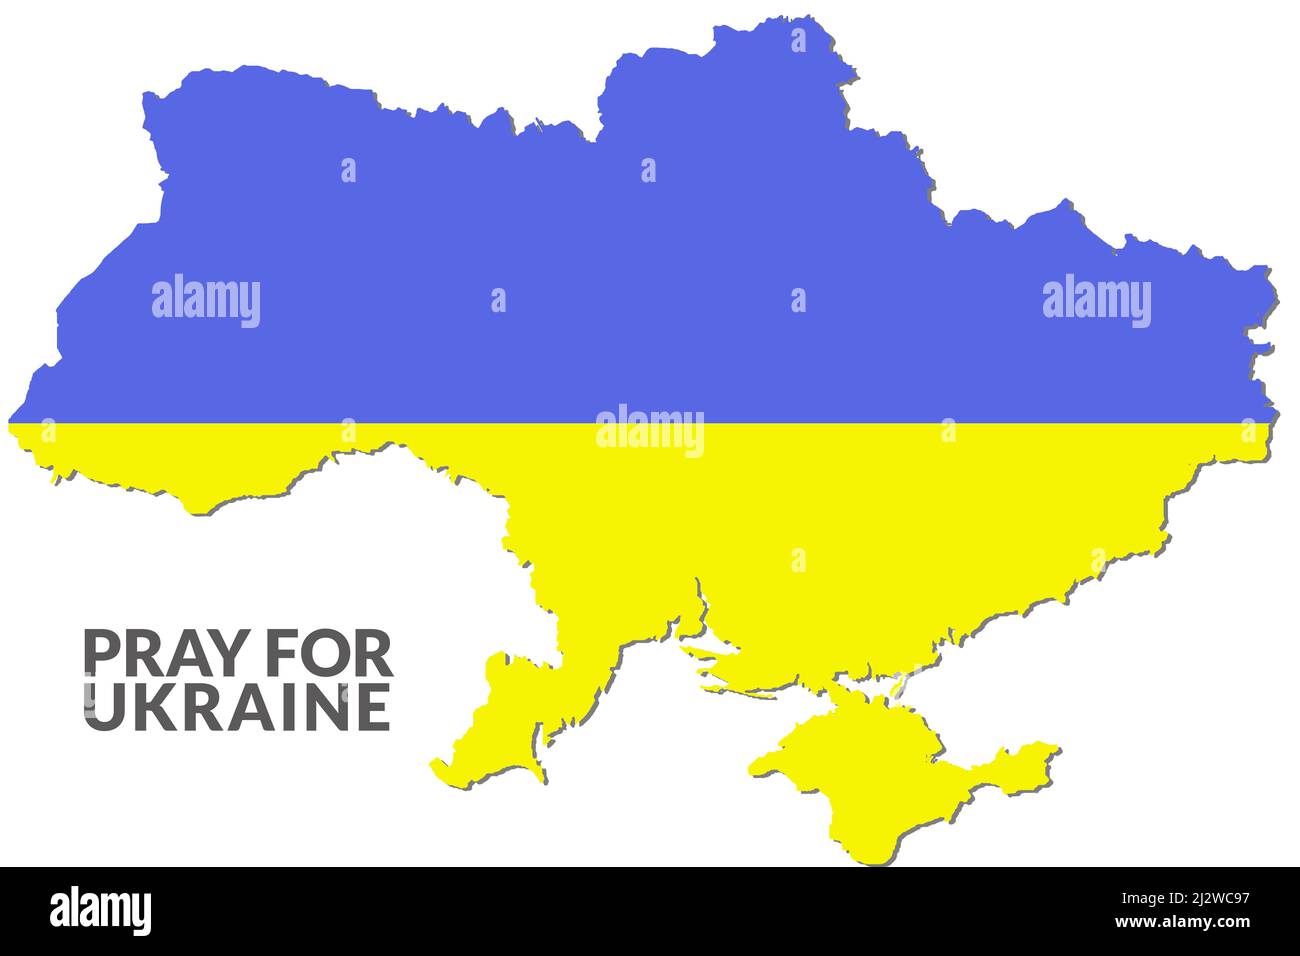 Slogan PRAY FOR UKRAINE and the map of Ukraine. The map in the color of the flag blue and yellow. Stock Photo